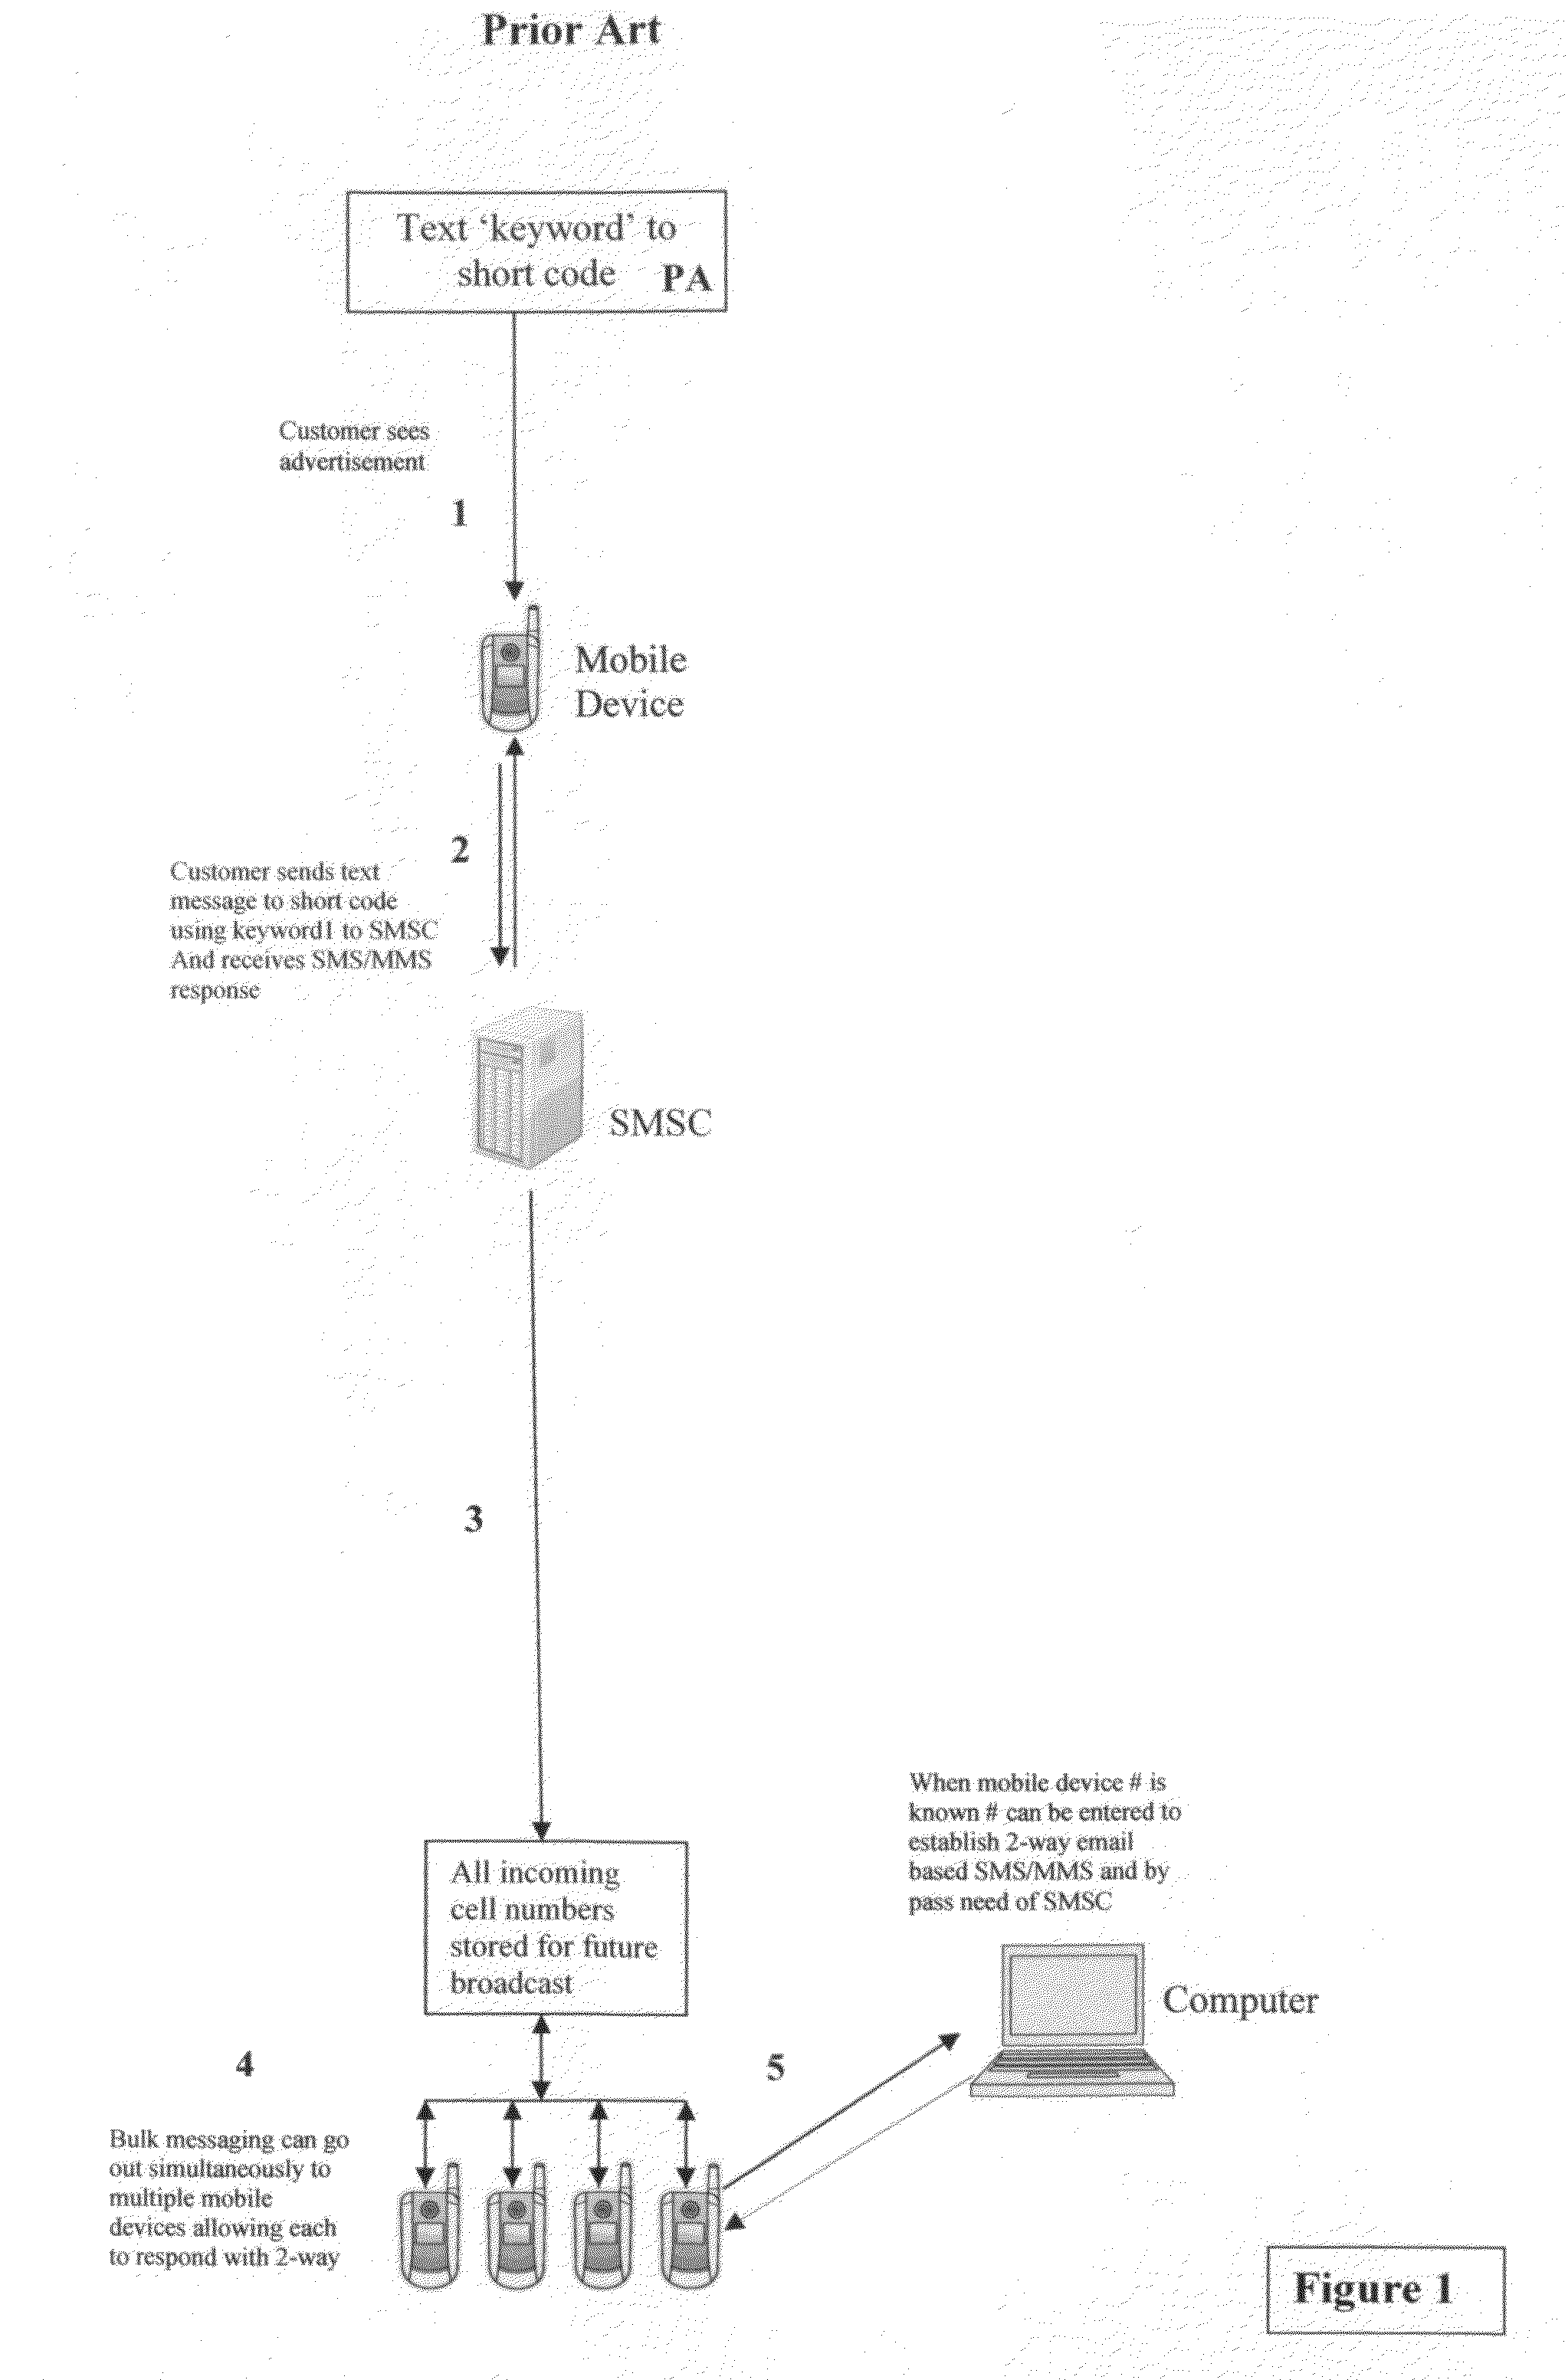 System for routing text messages (SMS) to allow for two-way mobile to computer communication